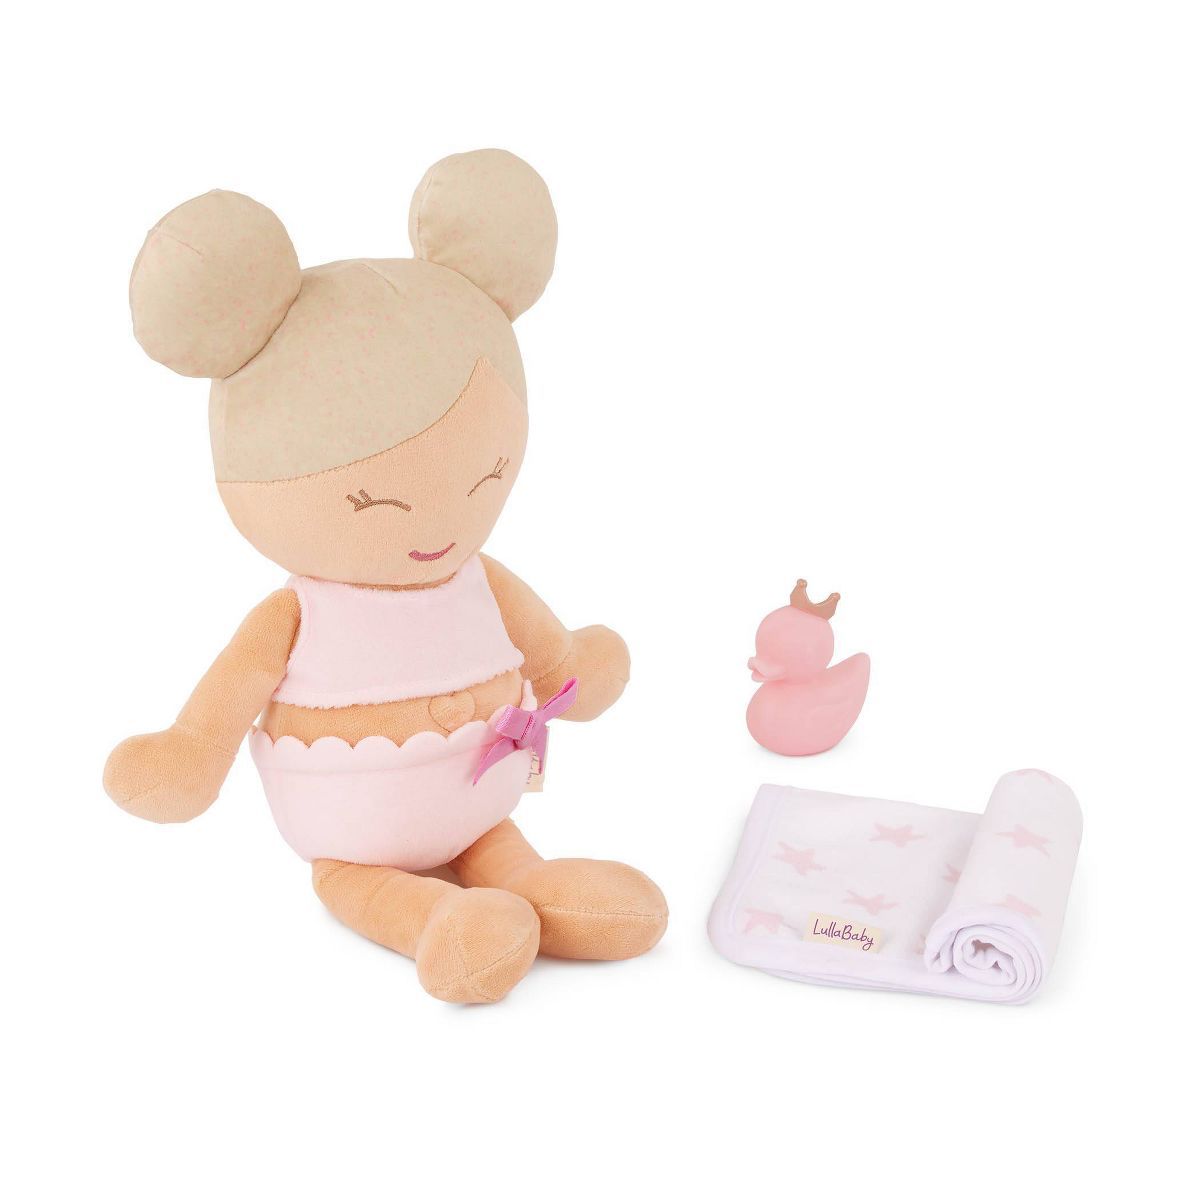 LullaBaby Bath Plush Doll for Real Water Play - Blonde Hair | Target